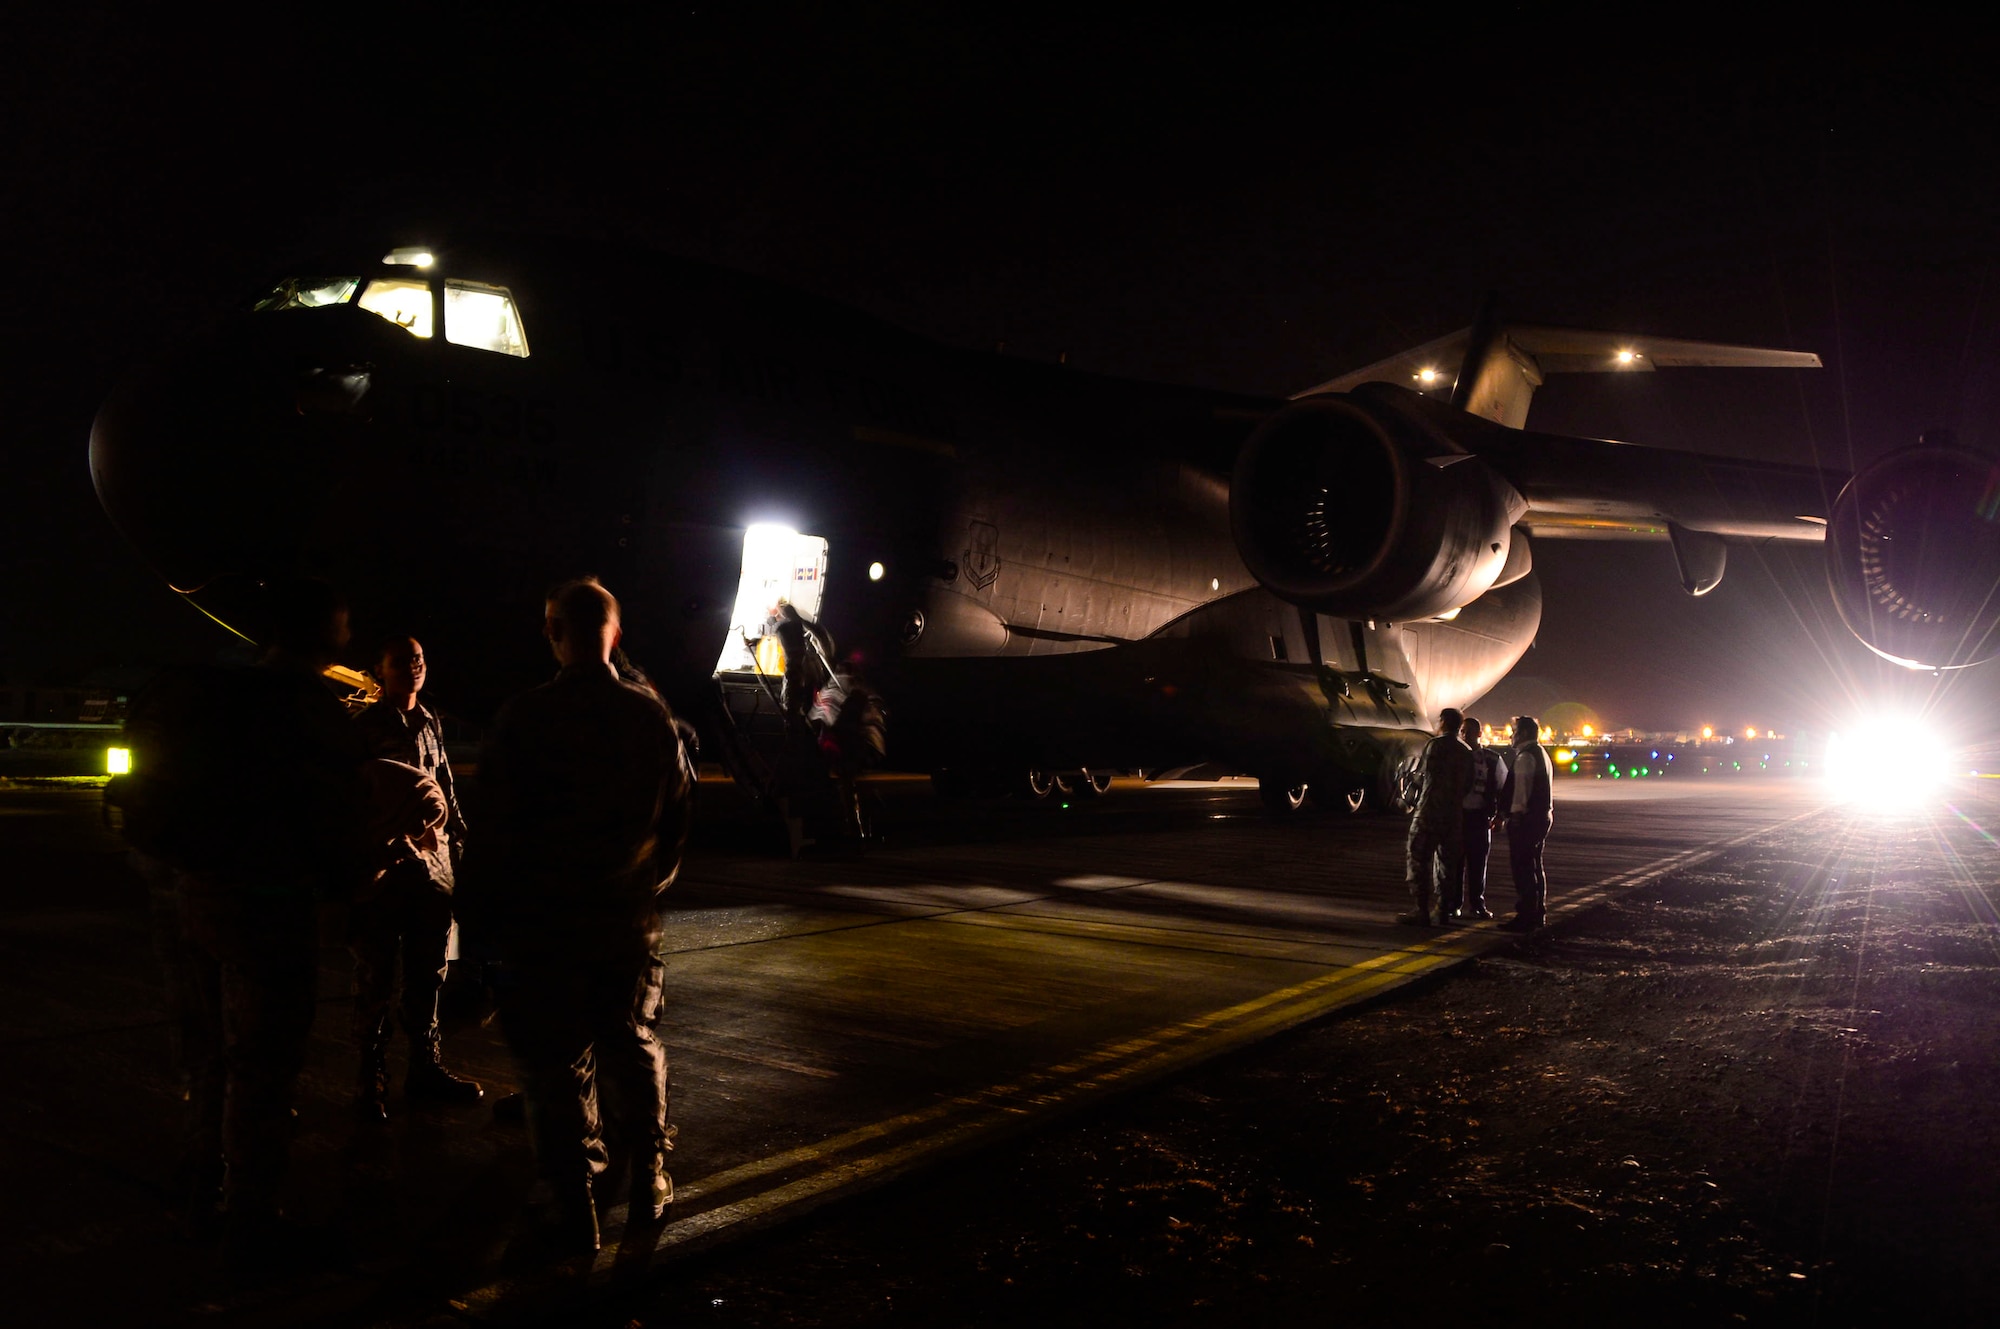 U.S. Airmen, from Wright-Patterson AFB, Ohio, disembark a C-17 Globemaster III in Santiago, Chile, for the 2016 International Air and Space Fair (FIDAE), March 27, 2016.  Airmen from around the U.S. are scheduled to participate in a variety of activities during the week-long air show that includes aerial demonstrations, interaction with the local community, and subject matter expert exchanges with the Chilean air force. (U.S. Air Force photo by Tech. Sgt. Heather Redman/Released)